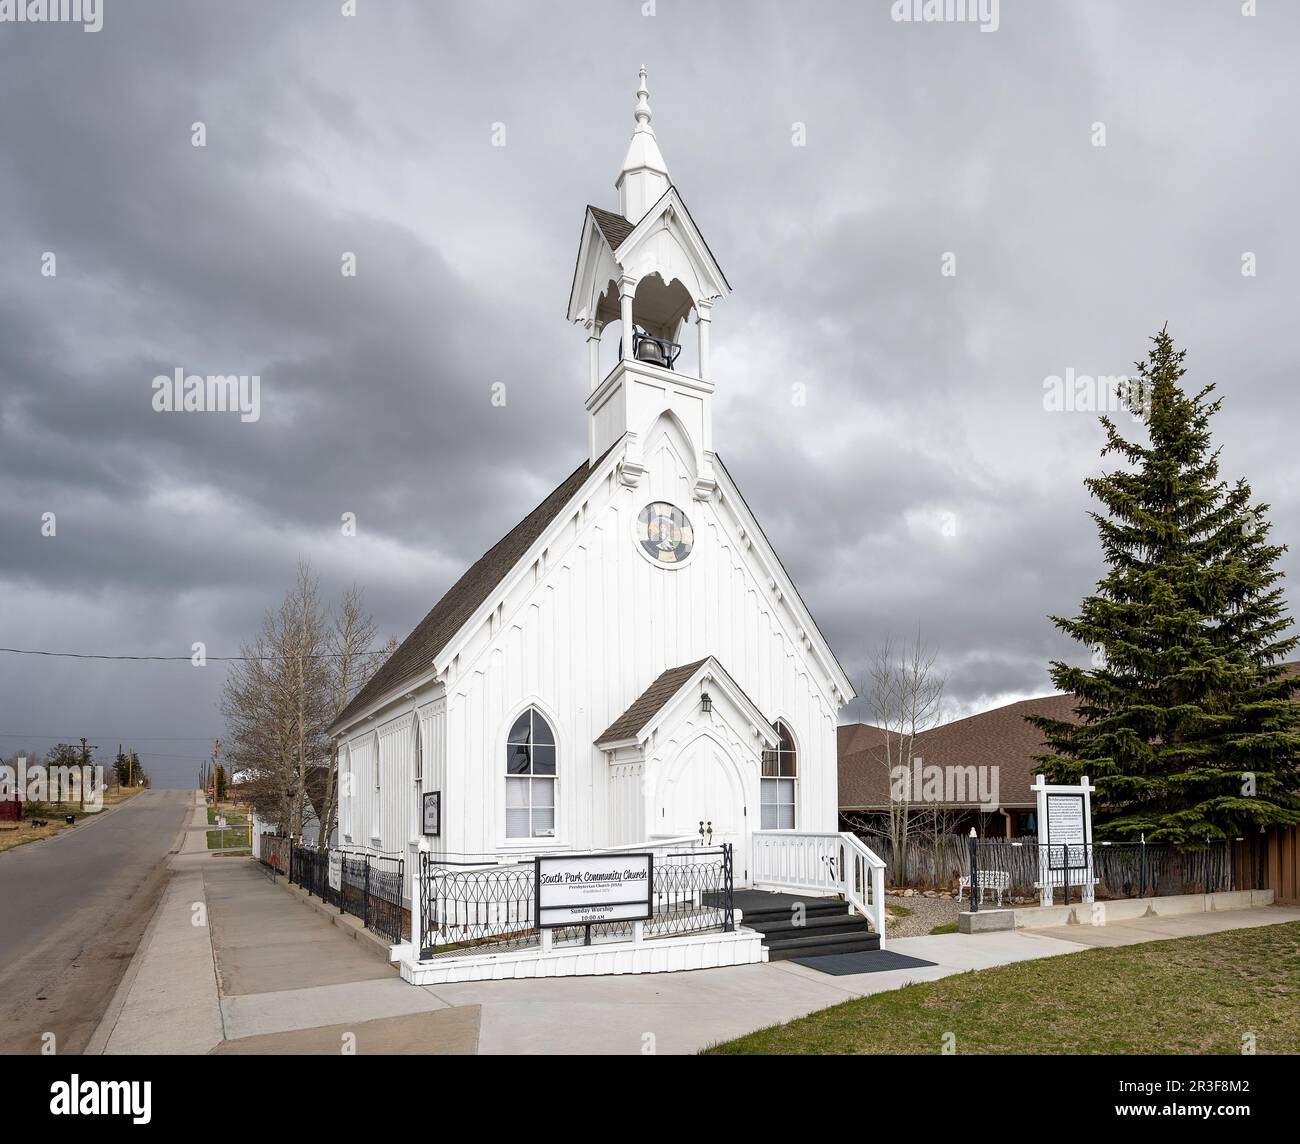 Exterior of the historic Gothic-style wooden South Park Community Church in Fairplay, Colorado, USA Stock Photo